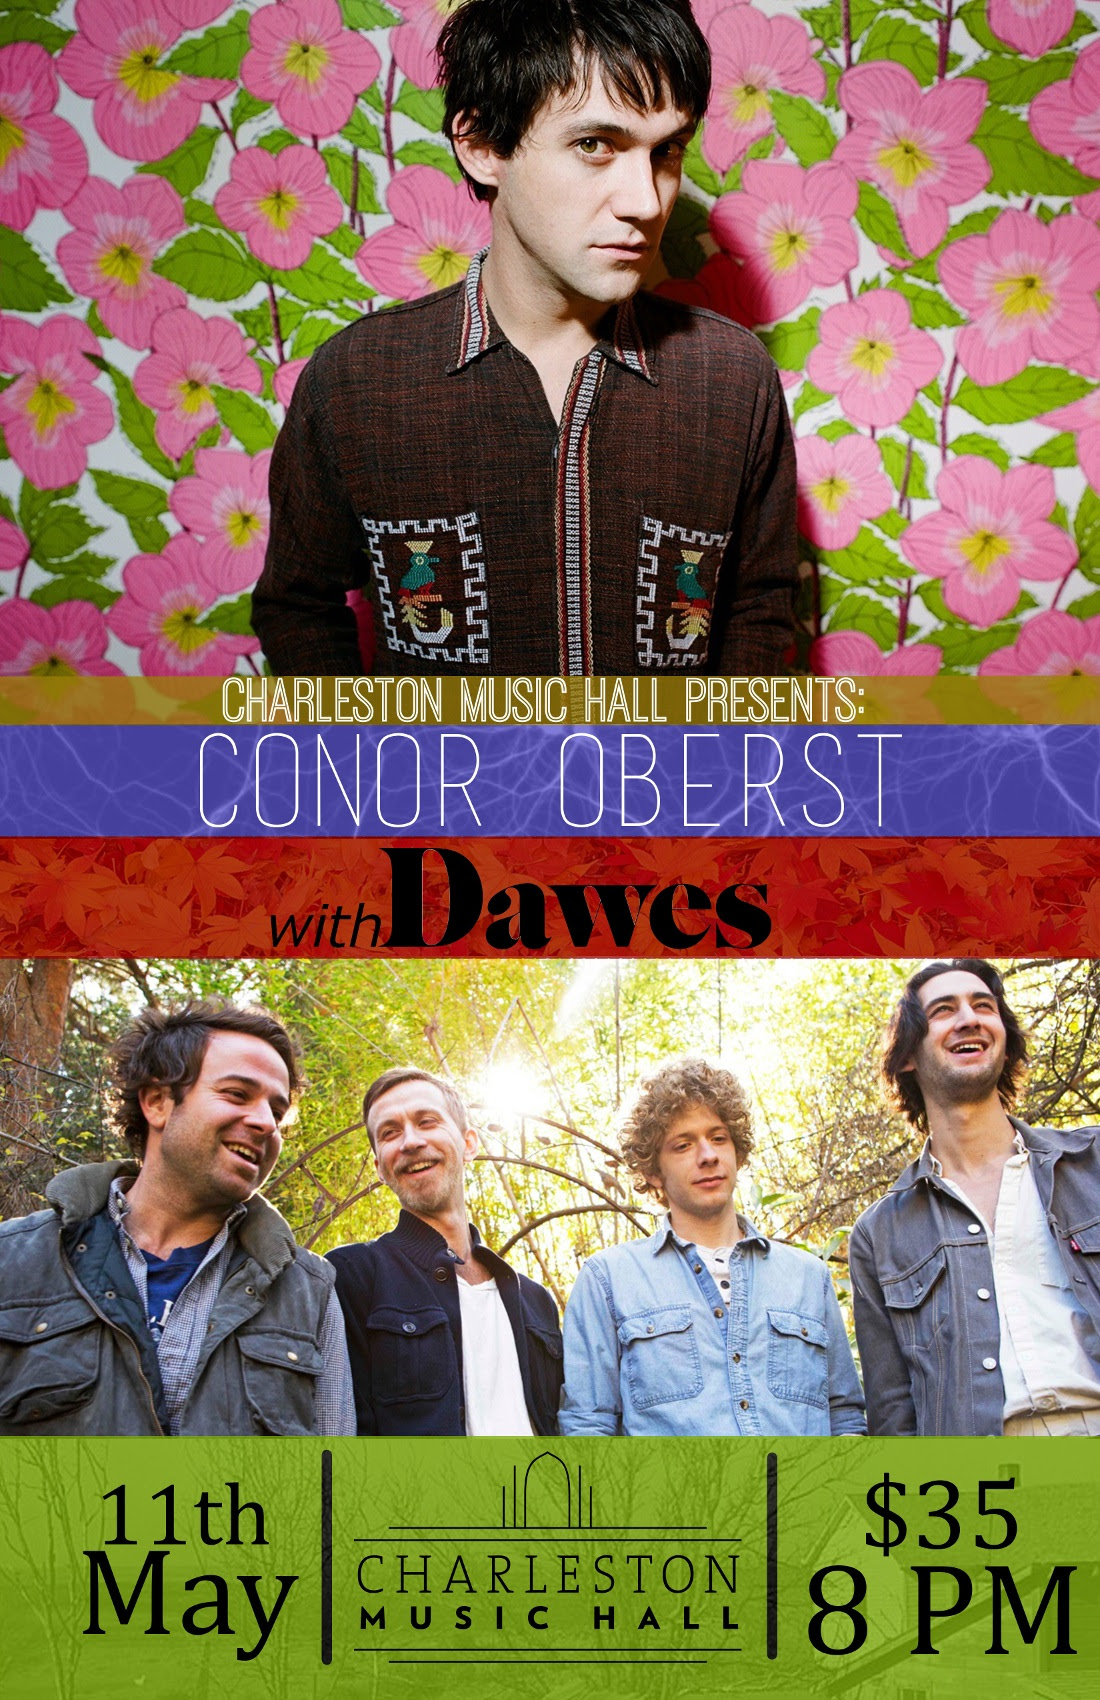 Conor Oberst with Dawes at Charleston Music Hall 